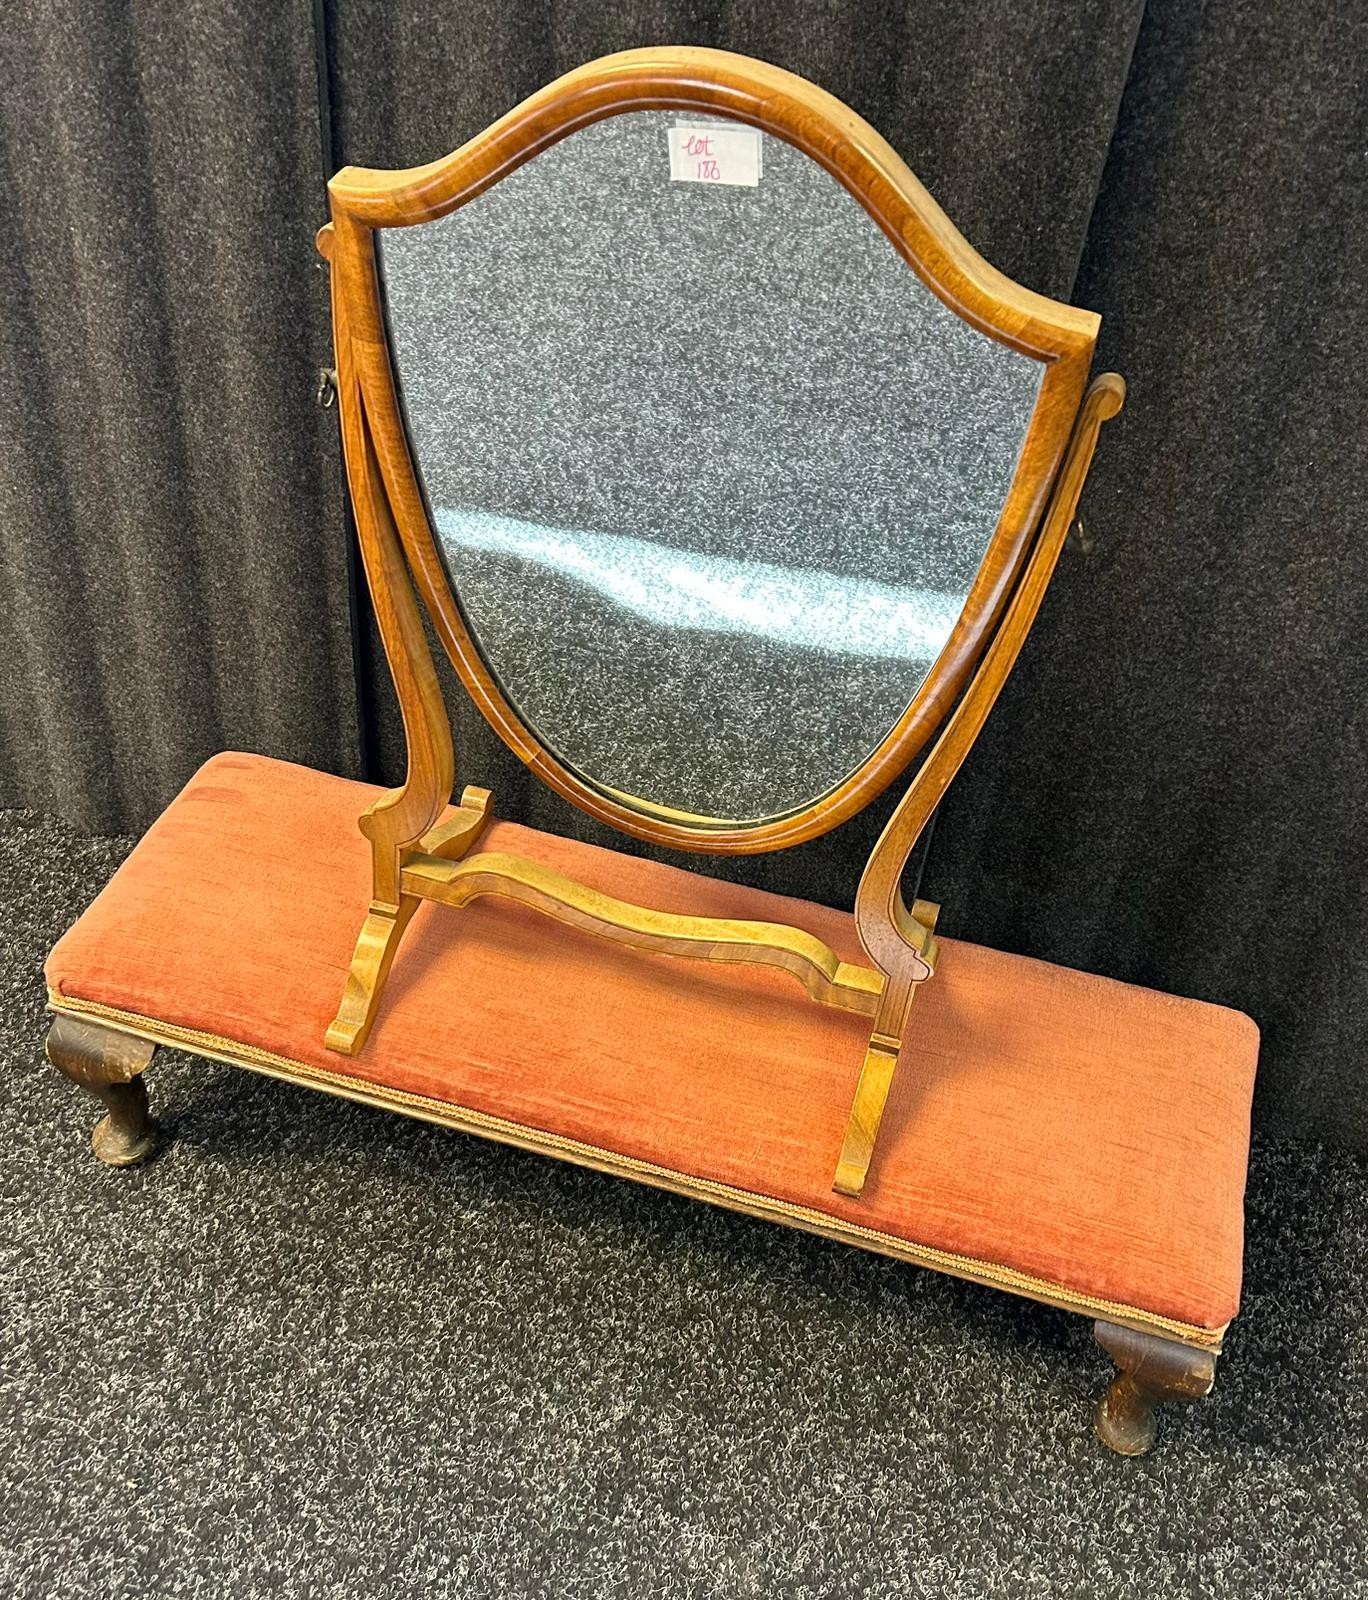 19th century shield shaped dressing table mirror together with rectangular foot stool - Image 2 of 2